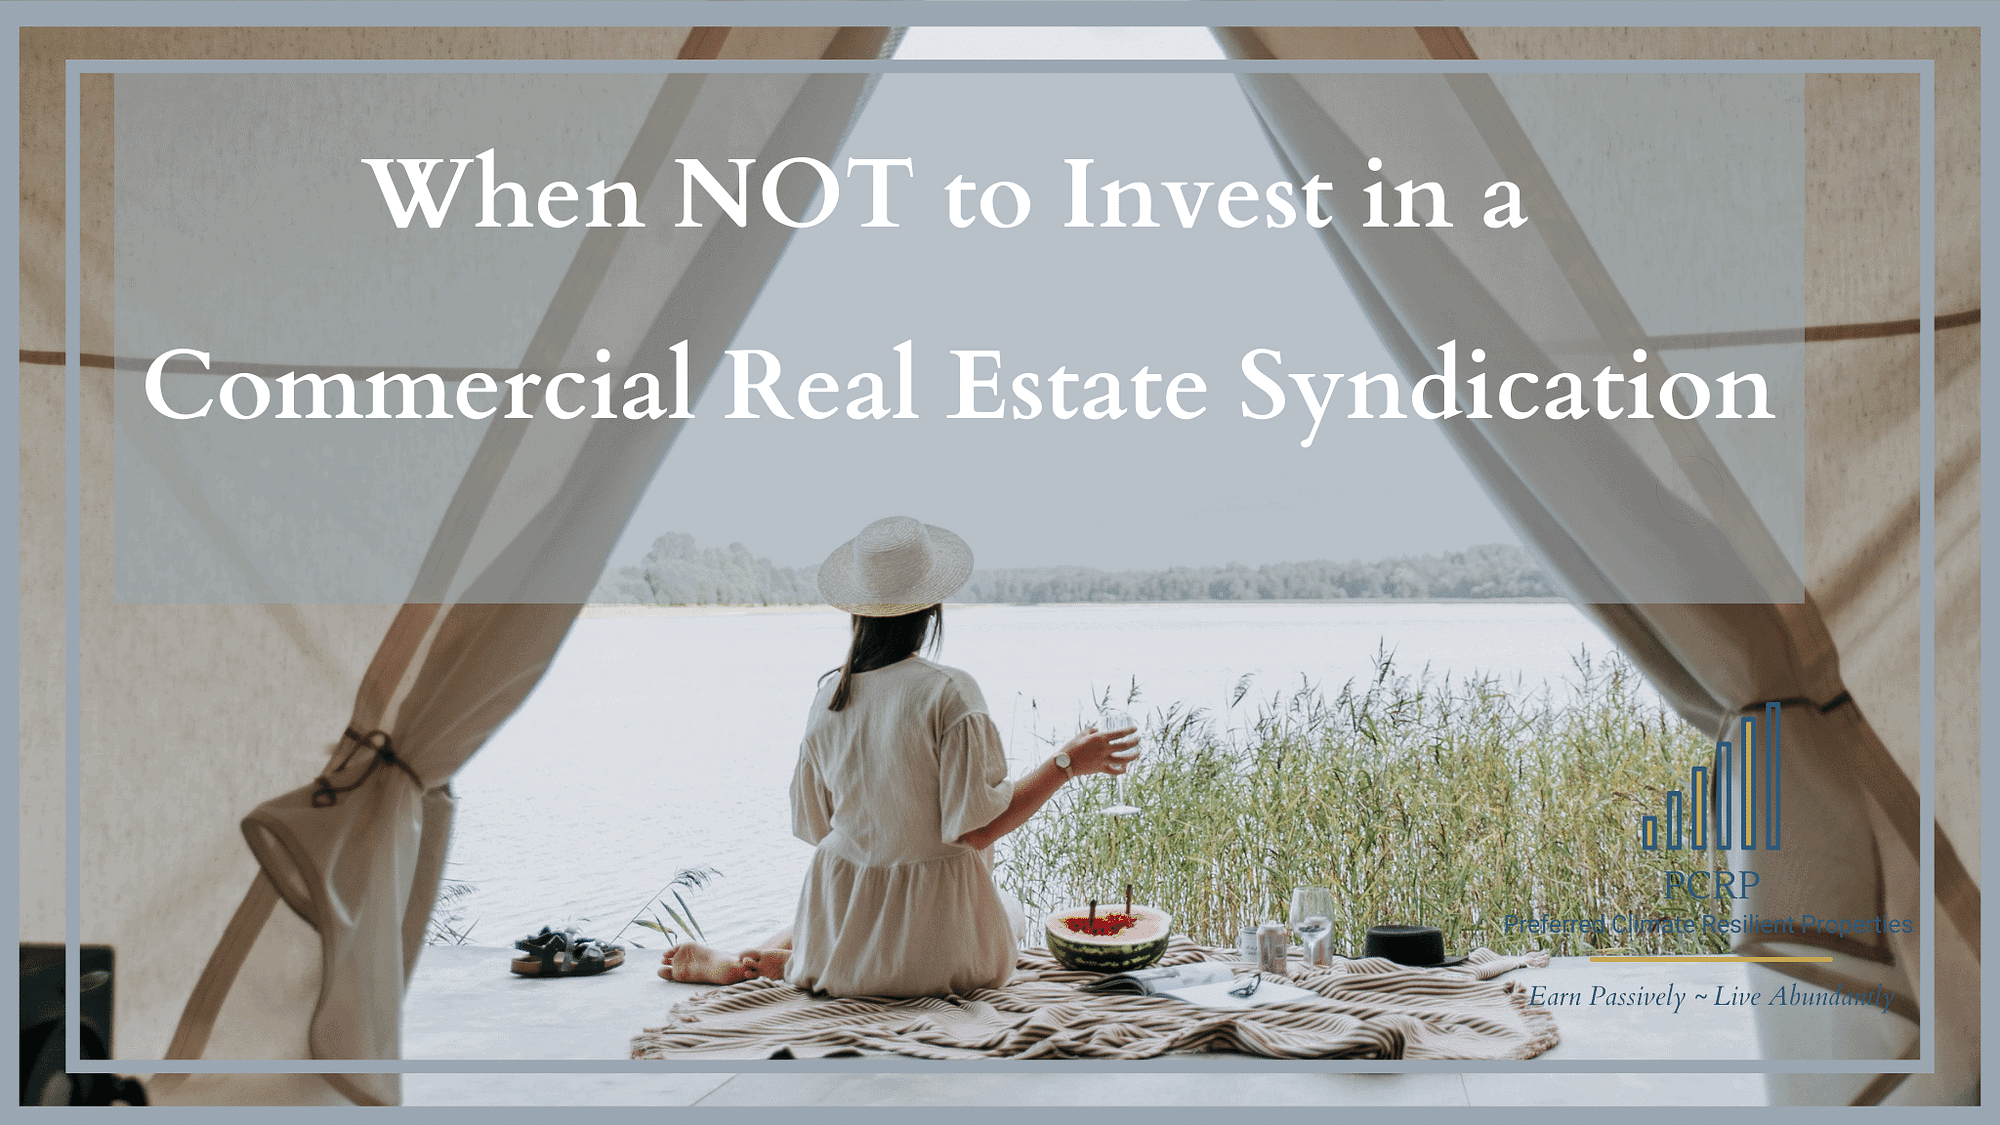 When NOT to invest in a real estate syndication